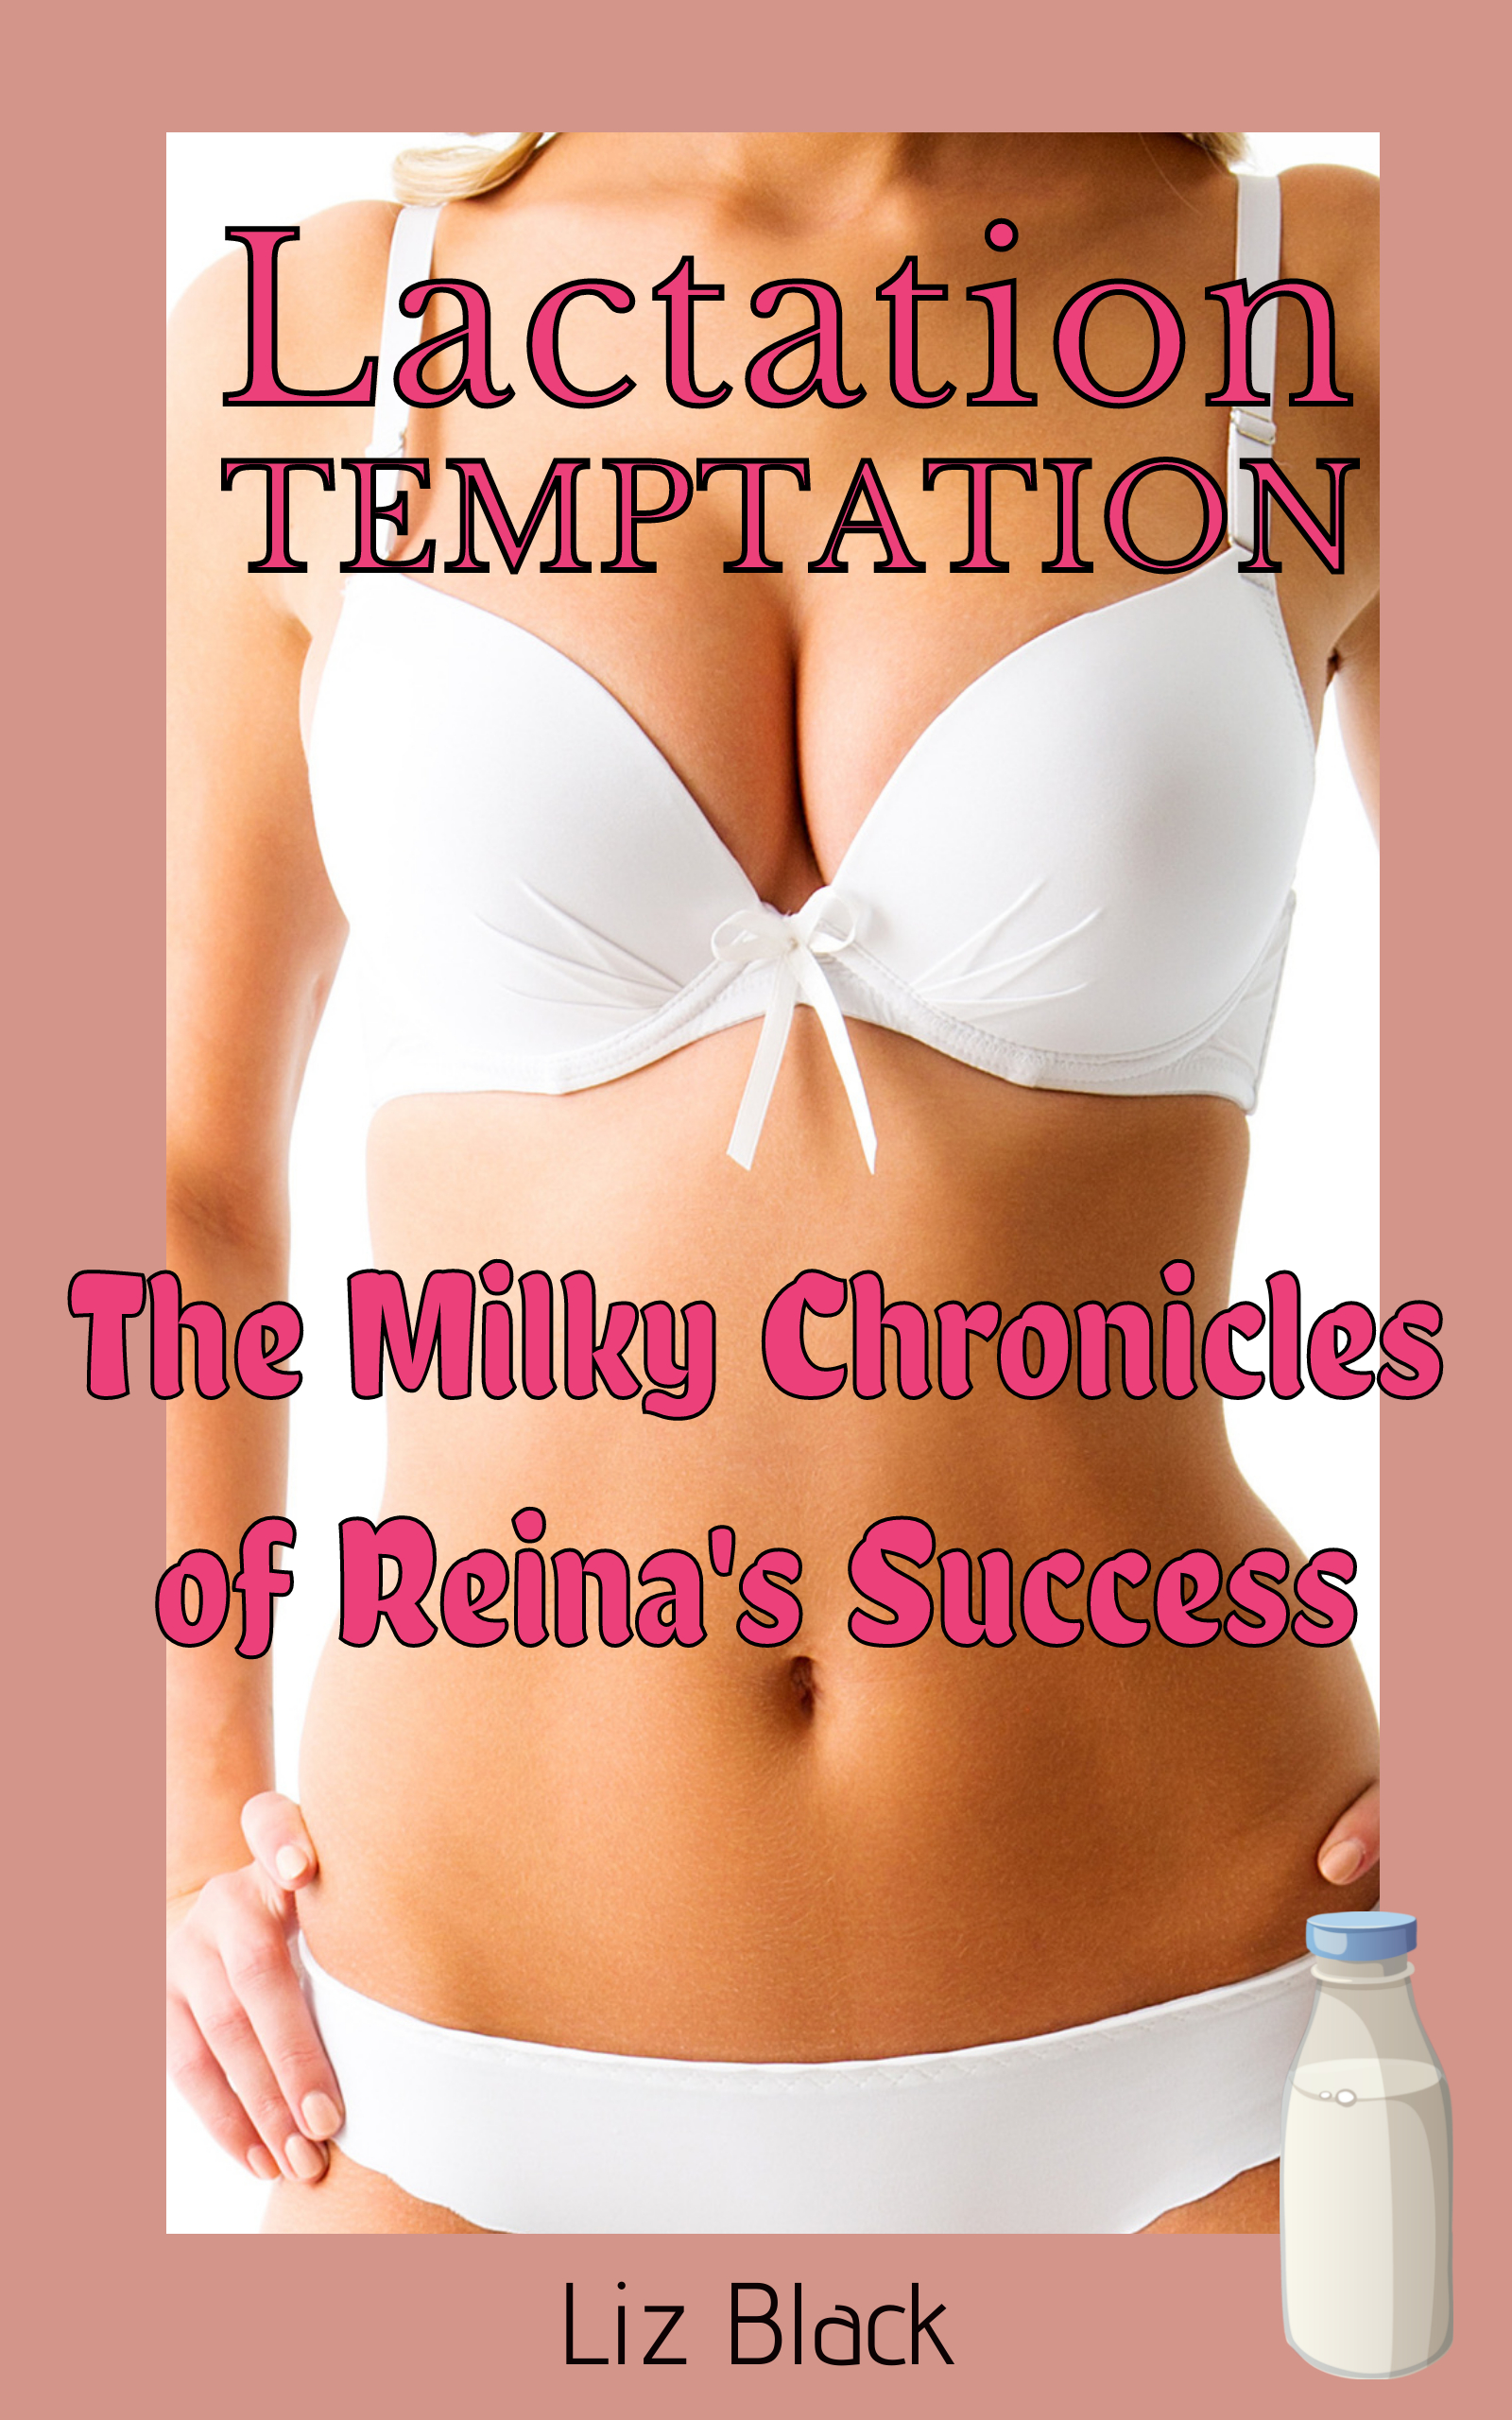 New Release: Lactation Temptation – The Milky Chronicles of Reina’s Success!